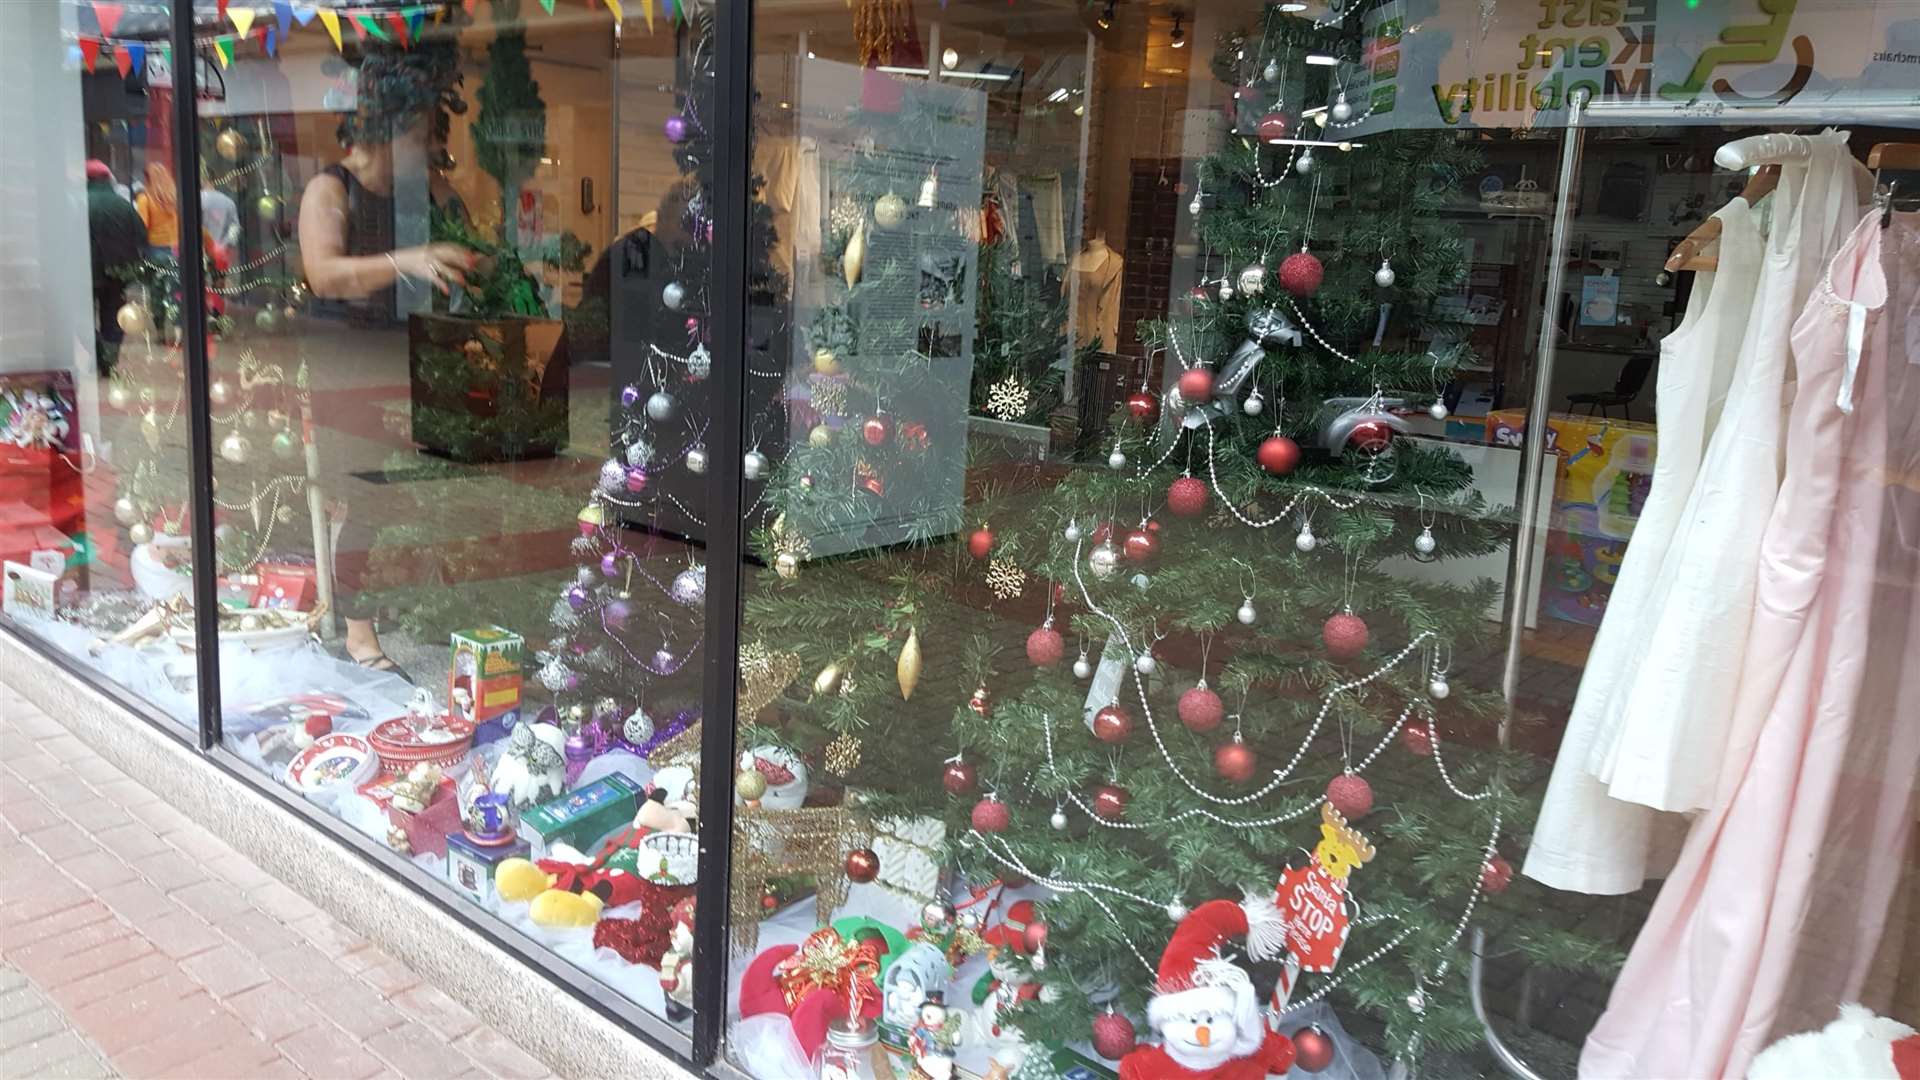 The Christmas display in the shop window